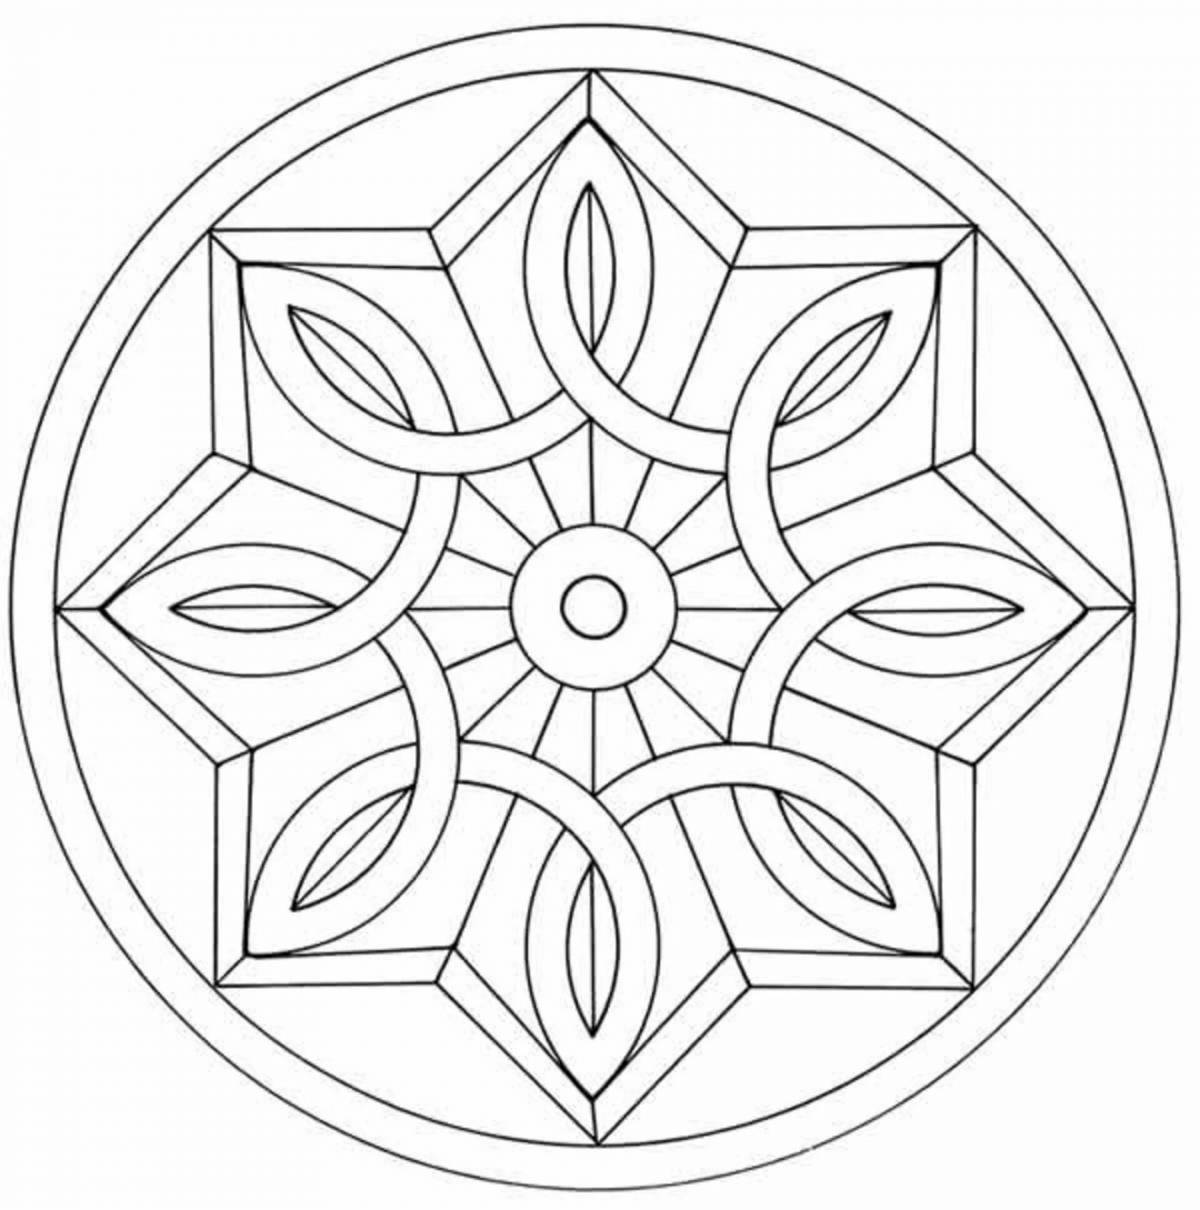 Great arabesque coloring book